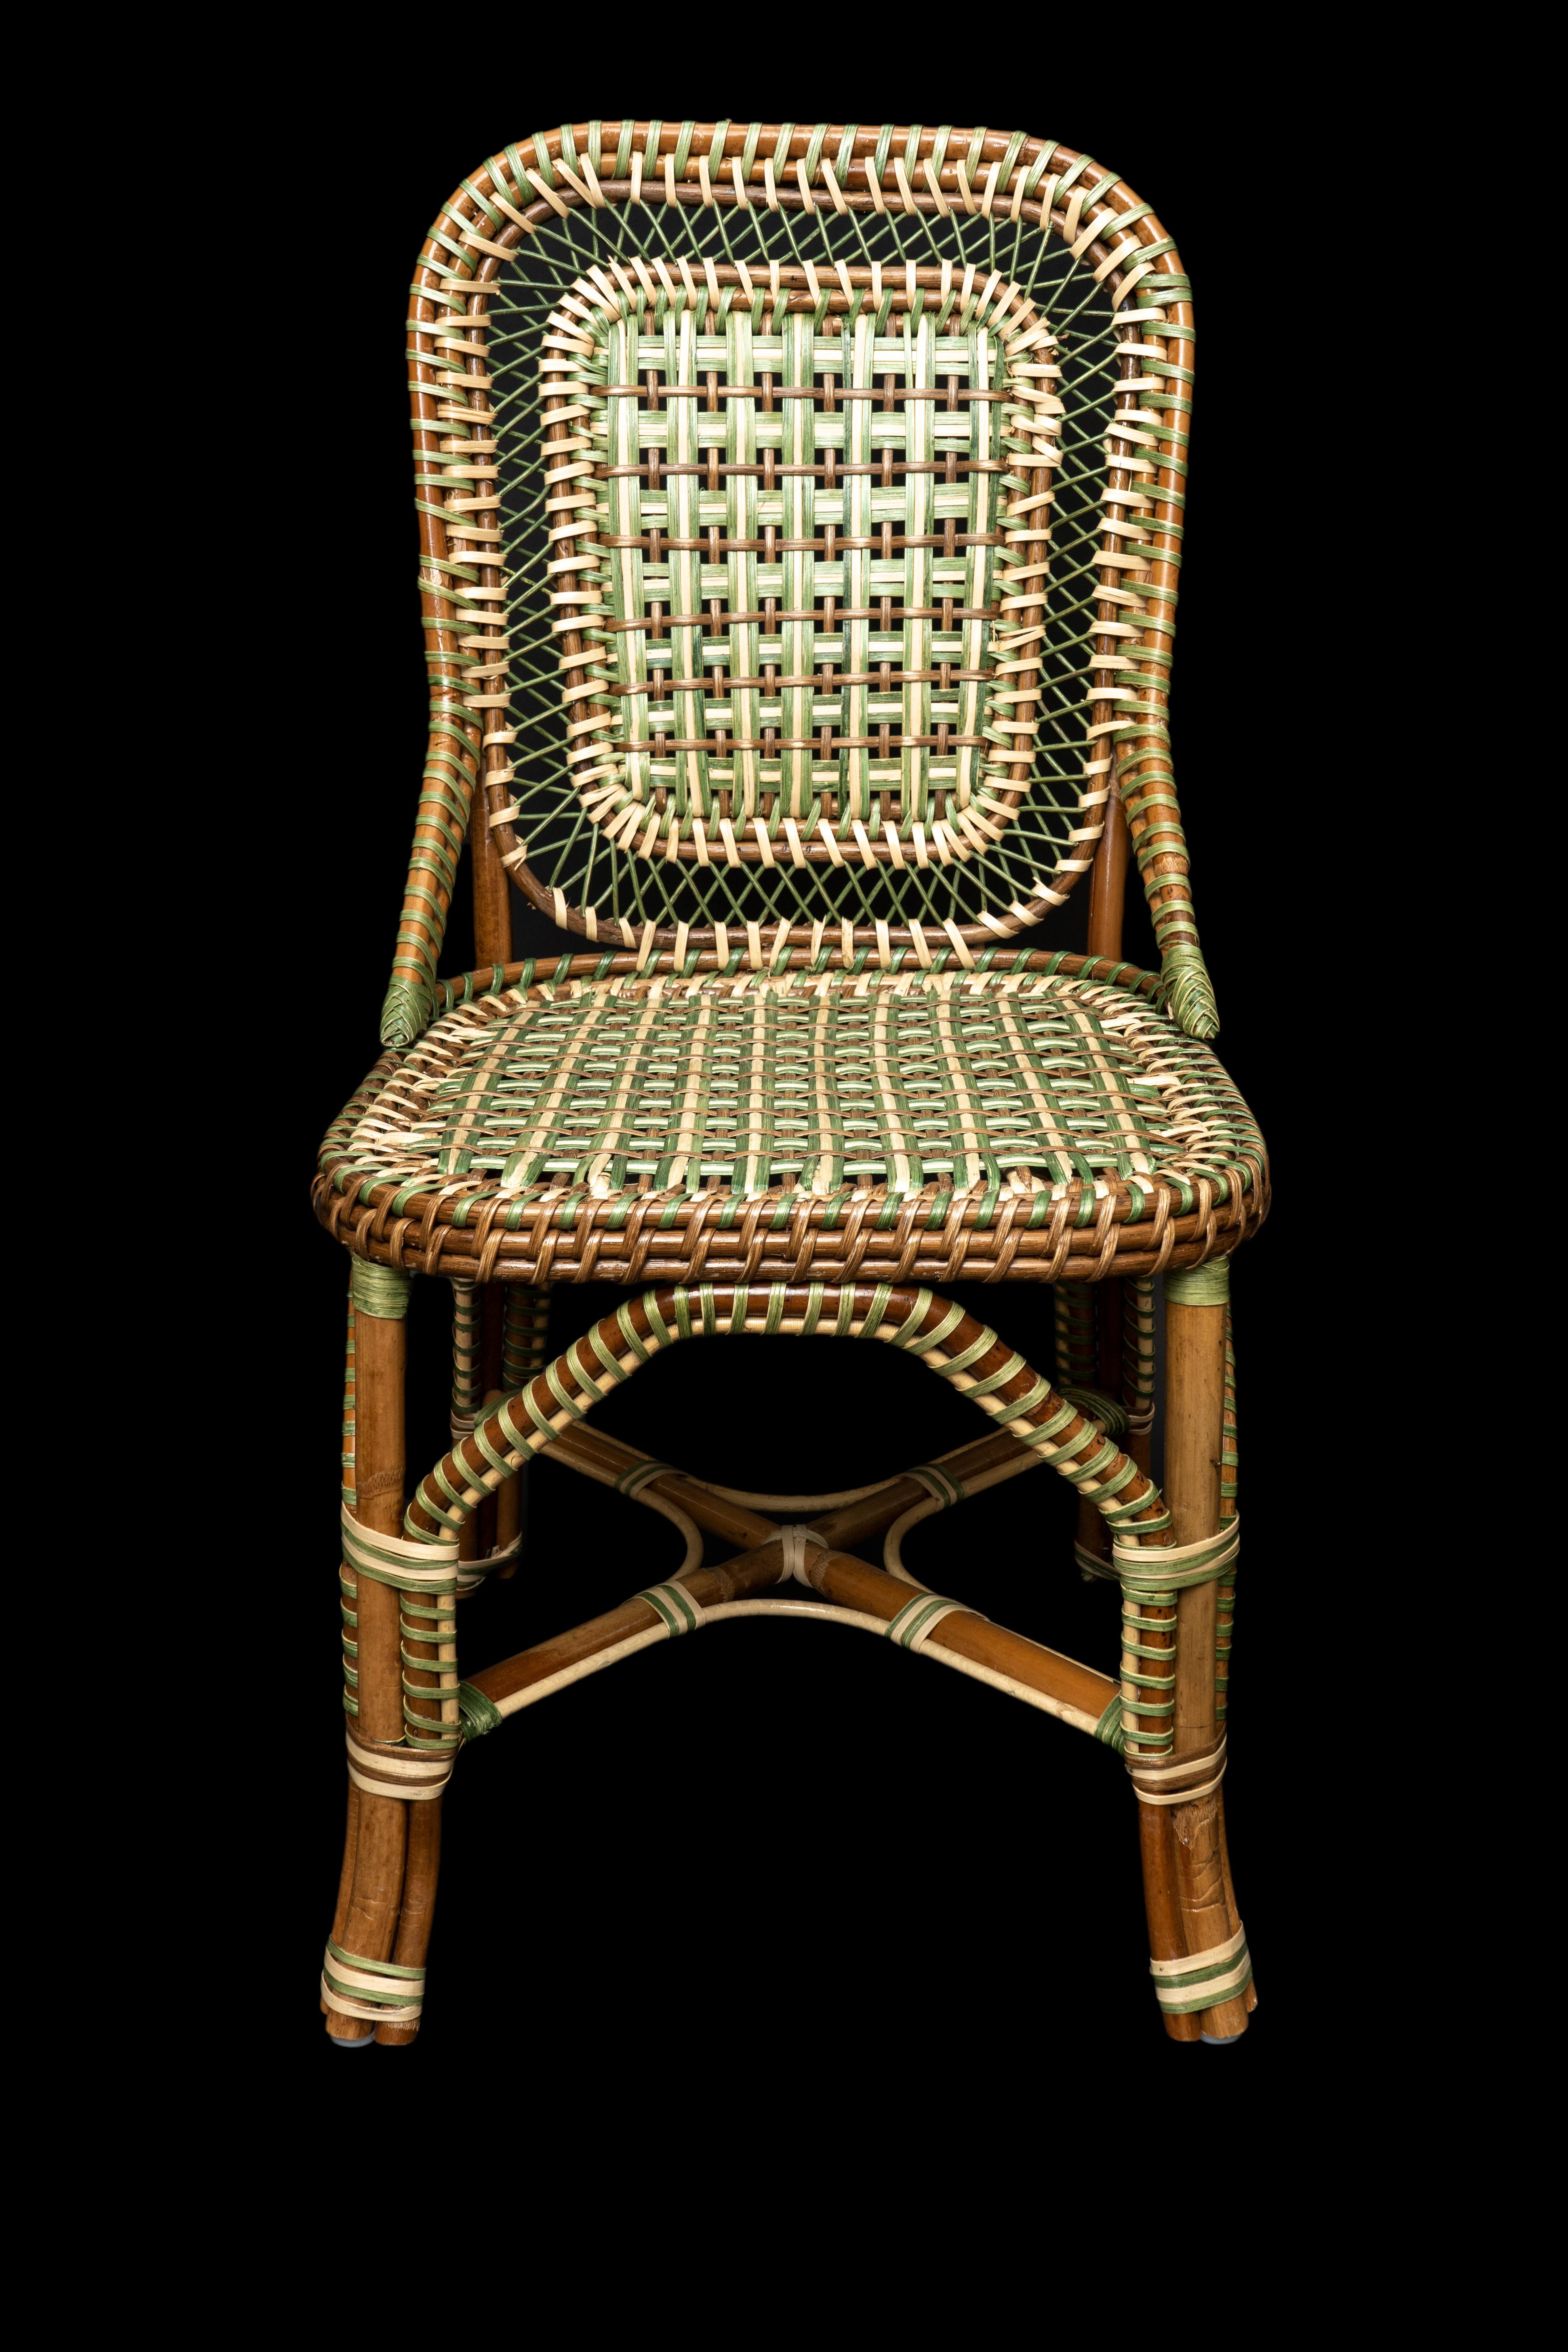 Marshan Rattan side chair by Creel and Gow, in green: Dimensions: 18.5